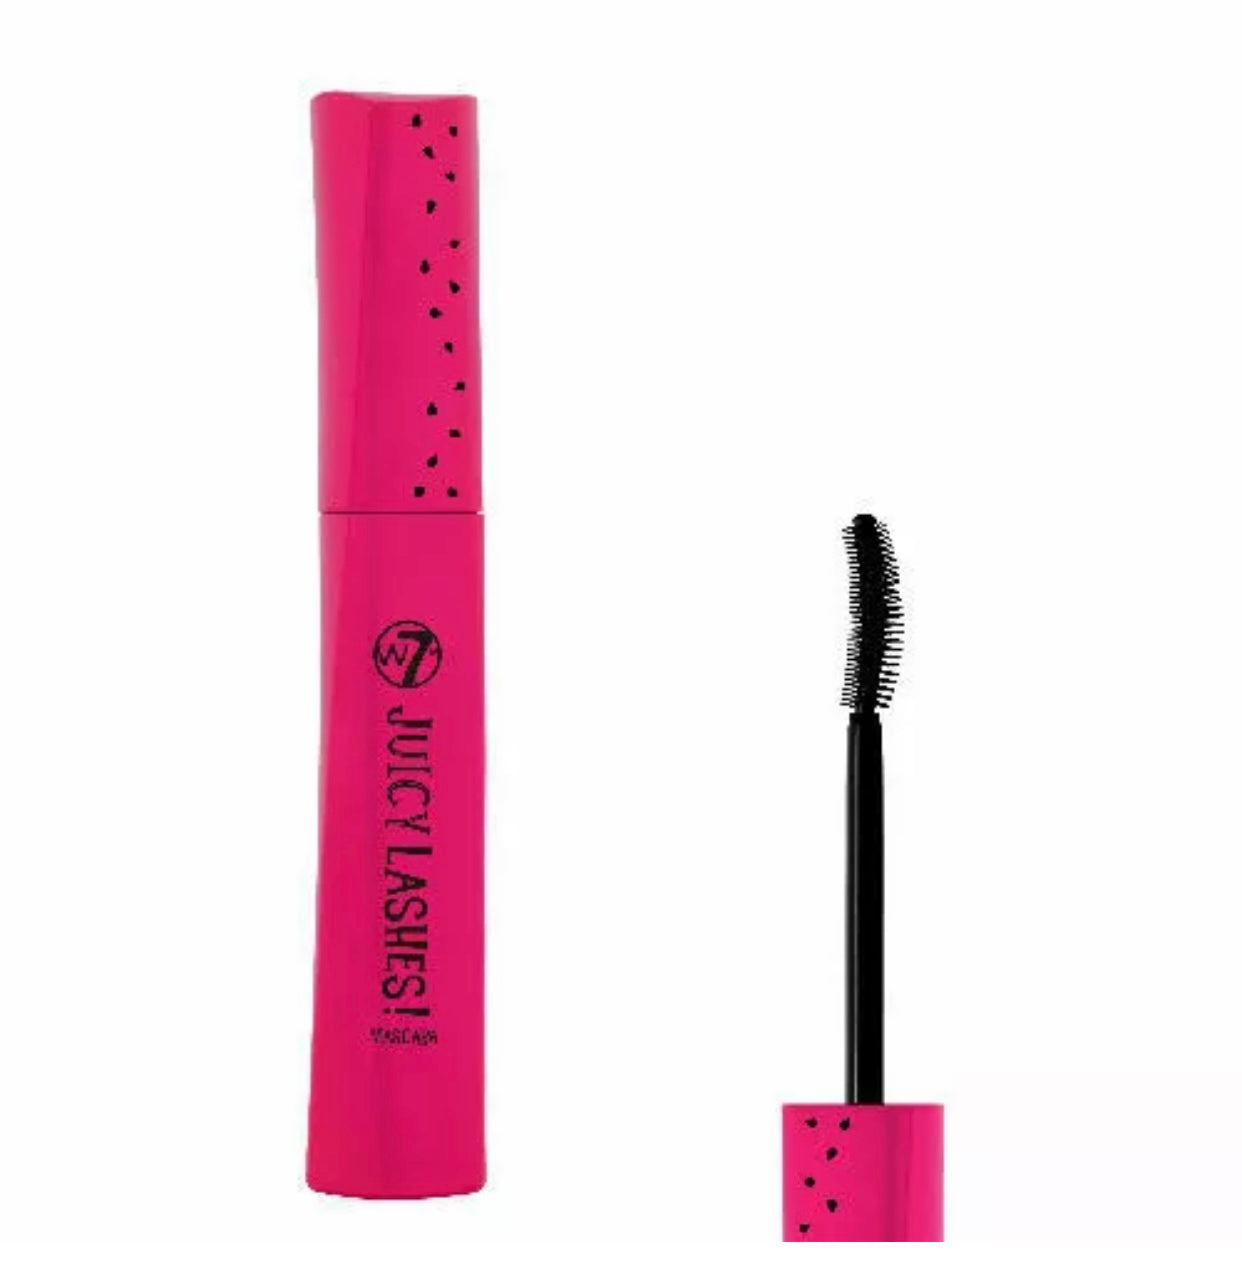 W7 Juicy Lashes Watermelon Scented Mascara